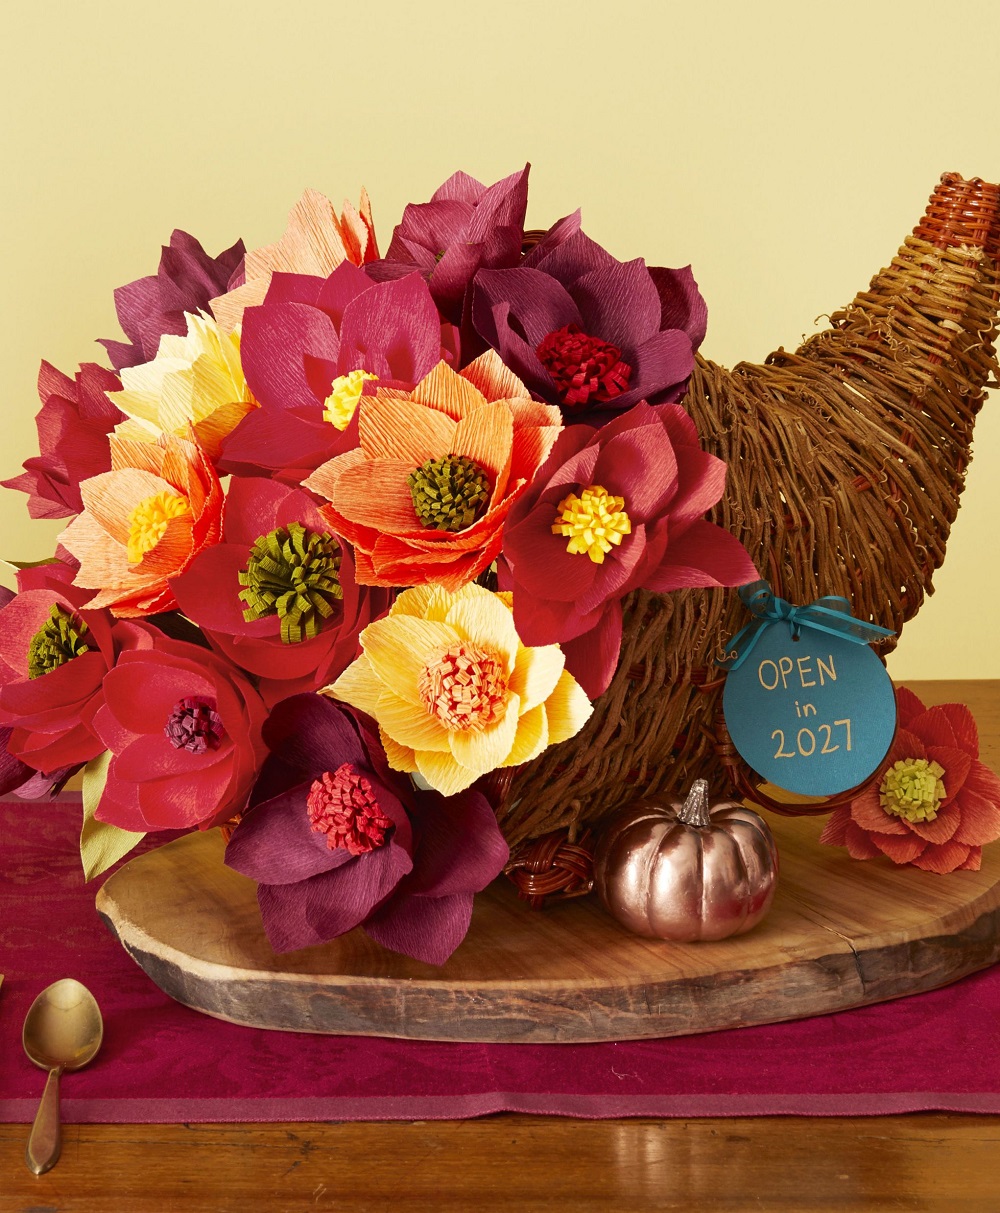 t3-53 Thanksgiving decorating ideas that will make your home look great